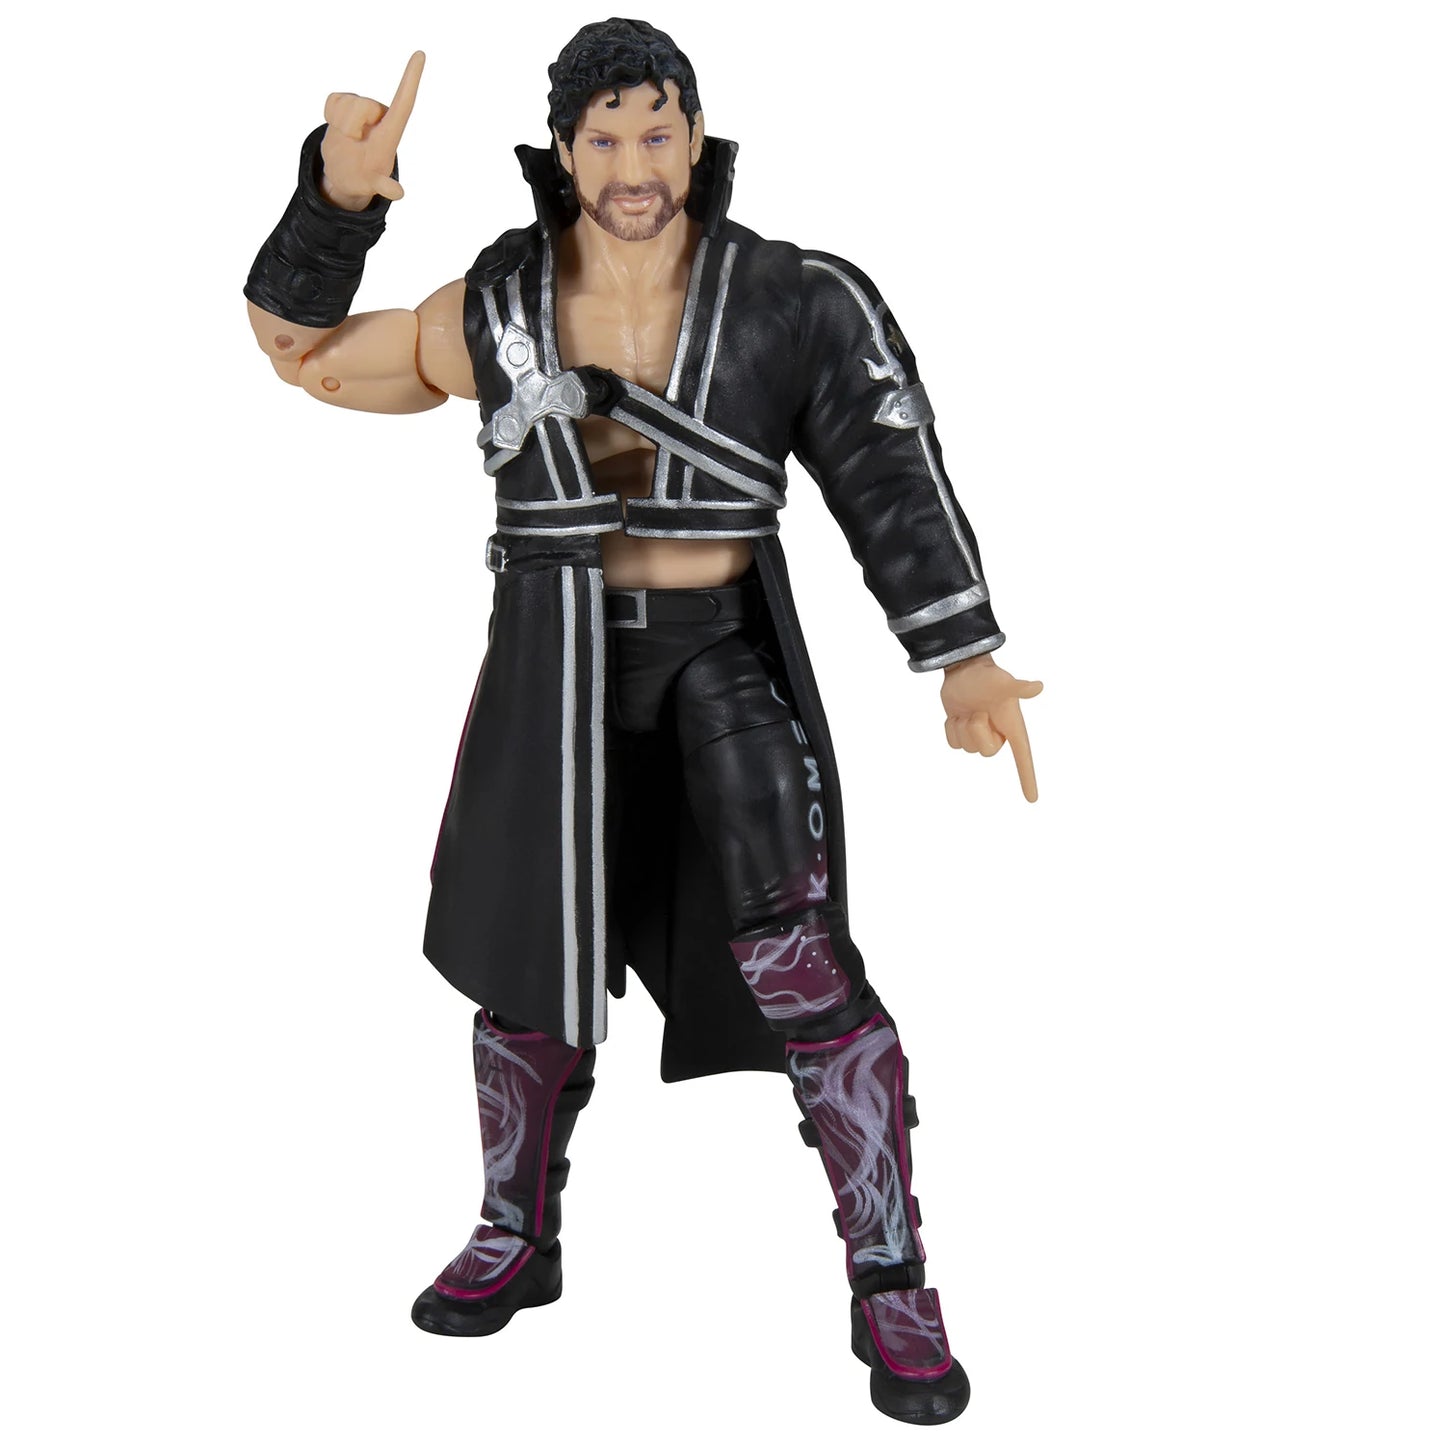 2020 AEW Jazwares Unrivaled Collection Series 1 #02 Kenny Omega